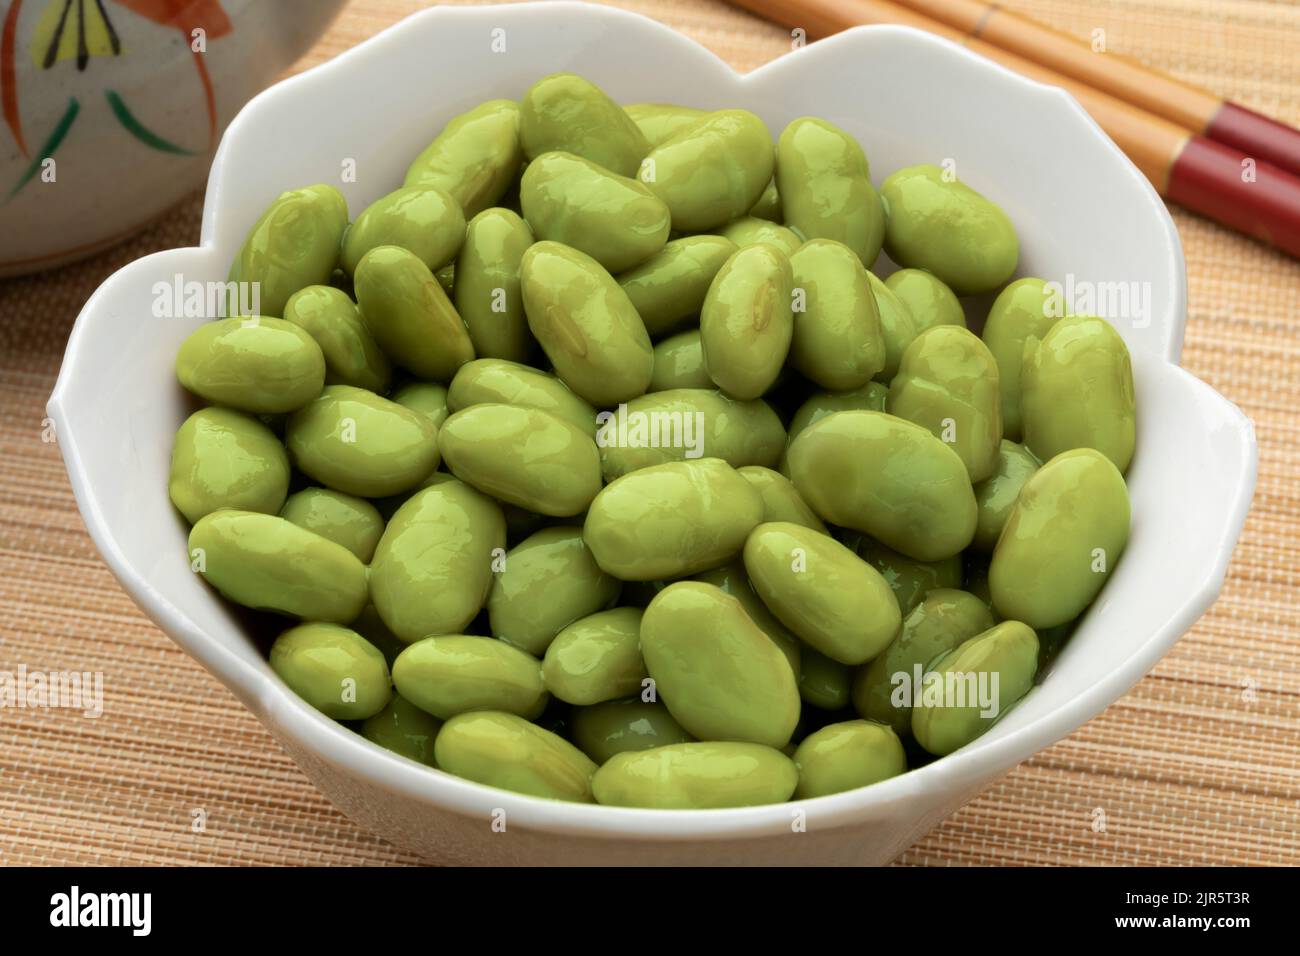 Bowl with preserved healthy green edamame beans close up Stock Photo